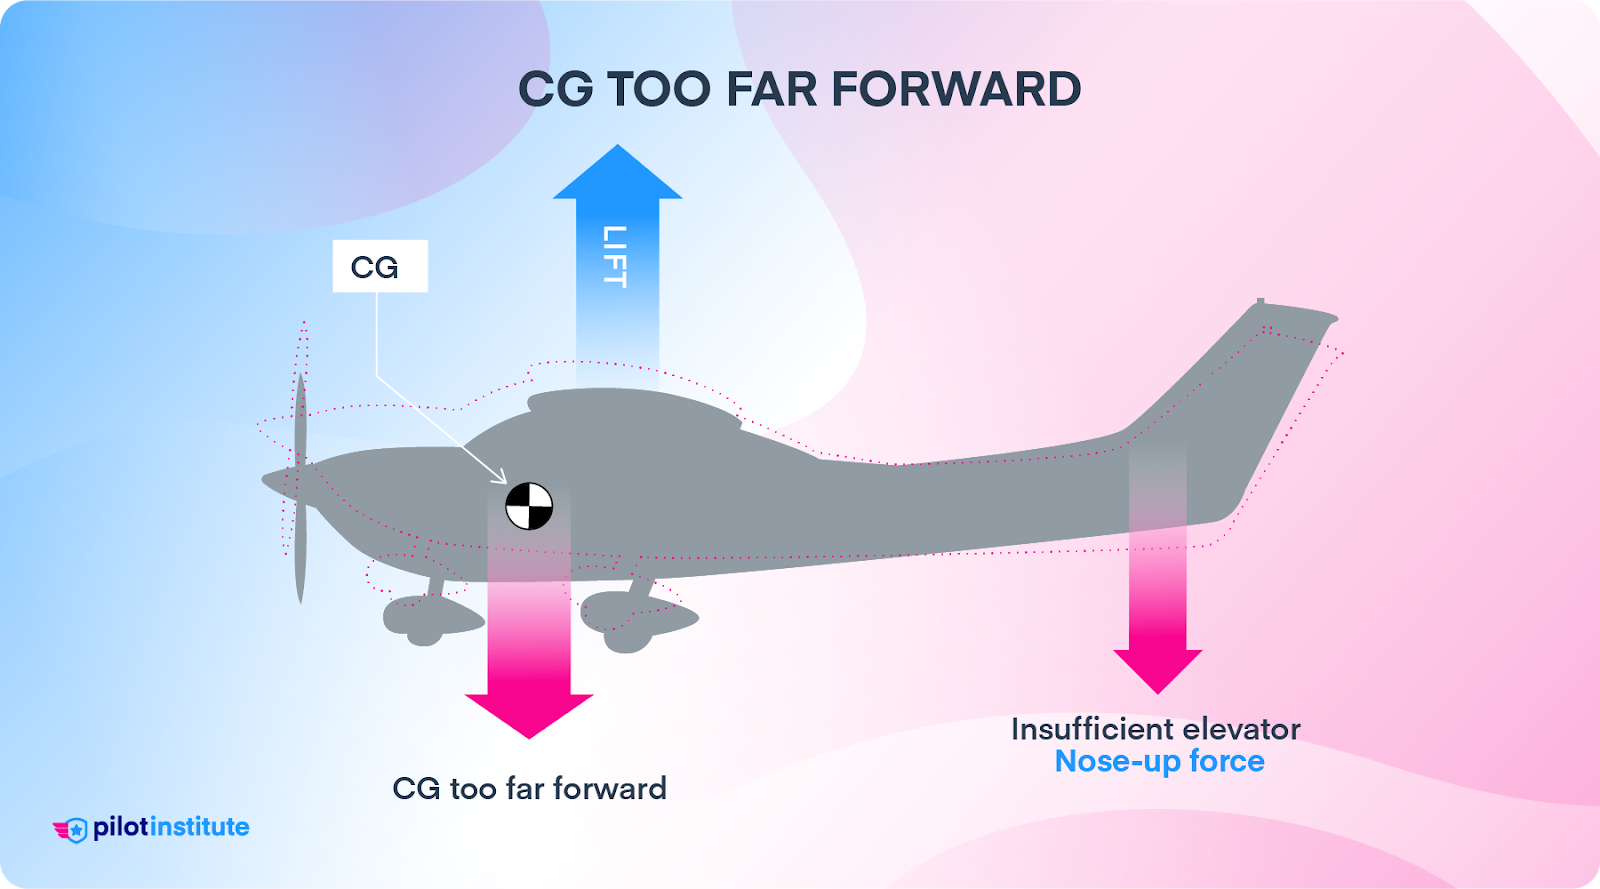 A CG too far forward results in insufficient nose-up force from the tail.